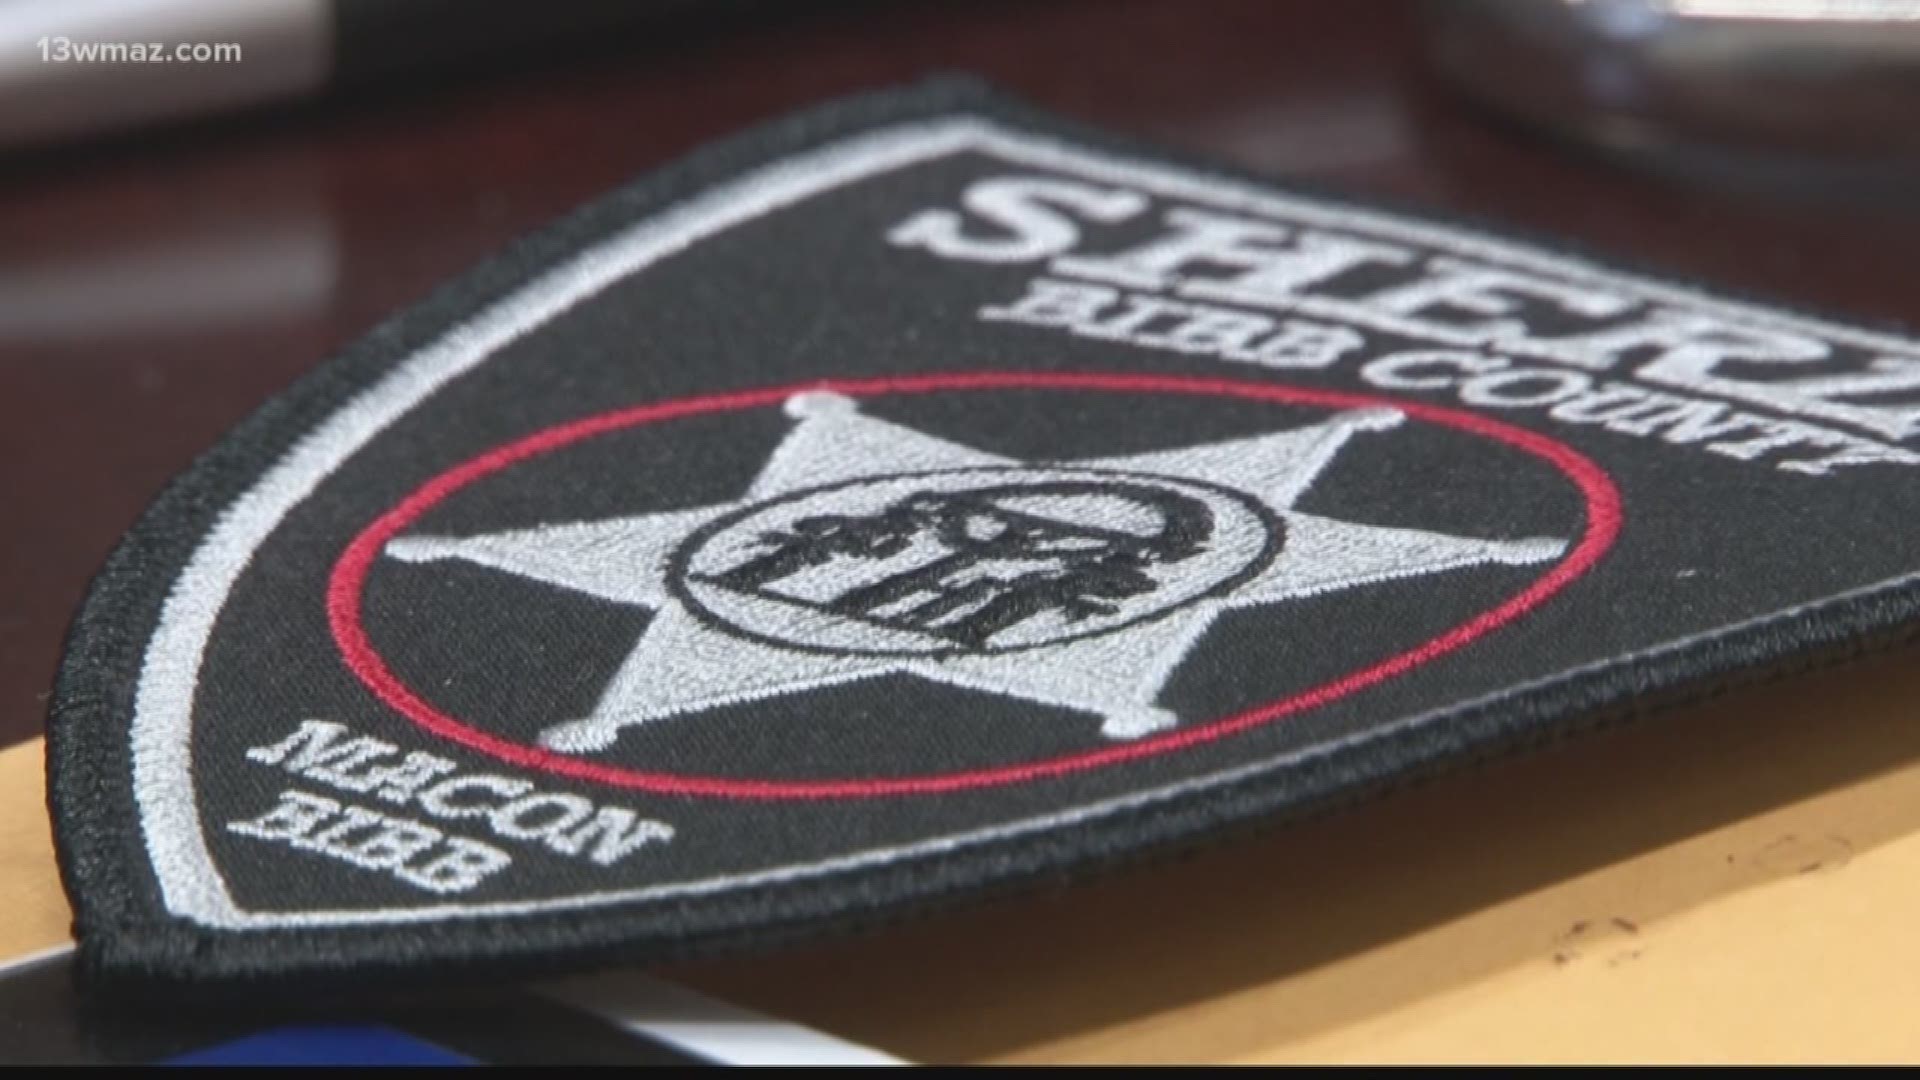 The Bibb County Sheriff's Office is looking for ways to deal with a deputy shortage. Here's what they have planned to try and recruit more qualified people into the law enforcement field.